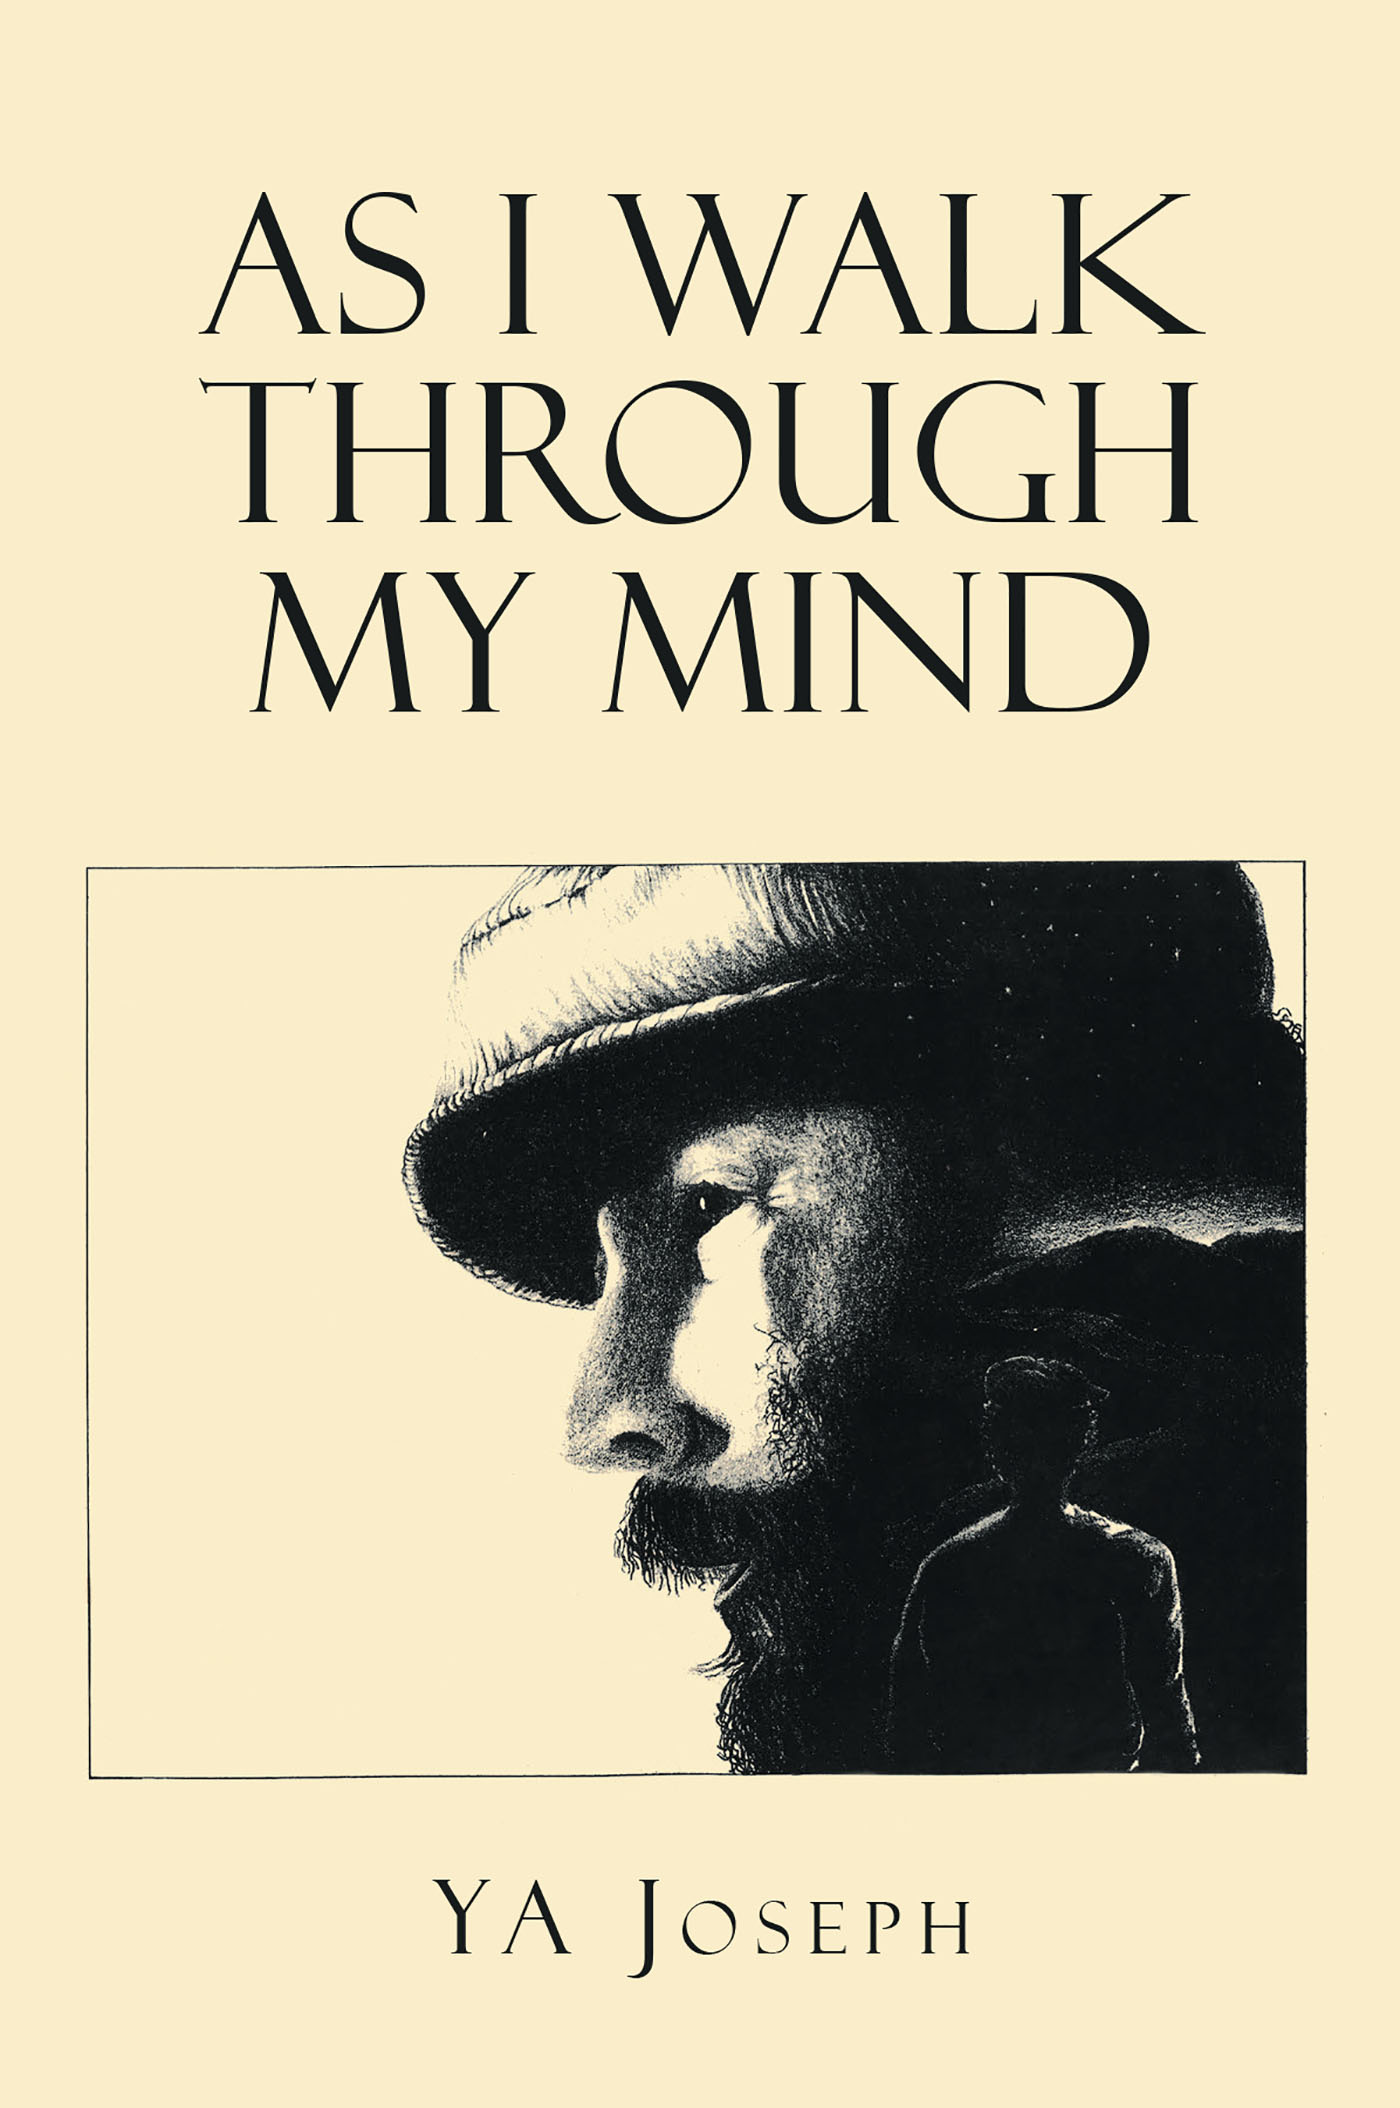 Author YA Joseph’s New Book, "As I Walk Through My Mind," is a Recollection of Events That Happened Throughout the Course of the Author’s Fascinating Life